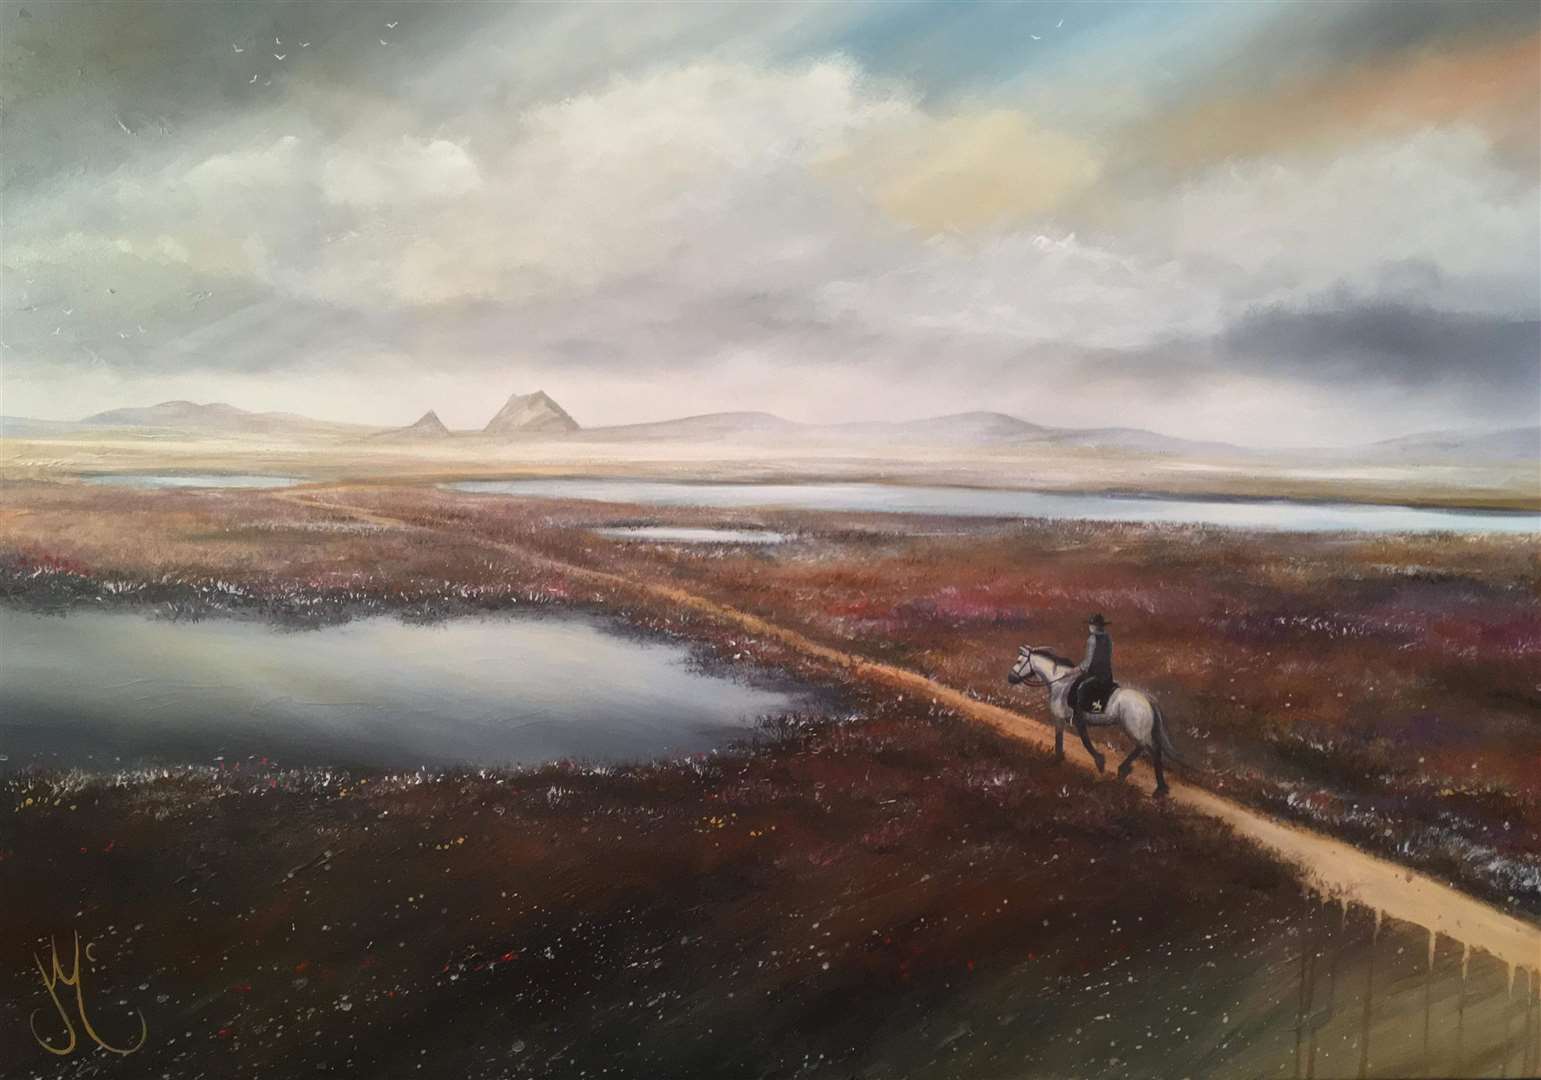 The Flow Country painting, featuring Louis Hall on his trek from John O'Groats to Land's End, raised £525 for cystic fibrosis.